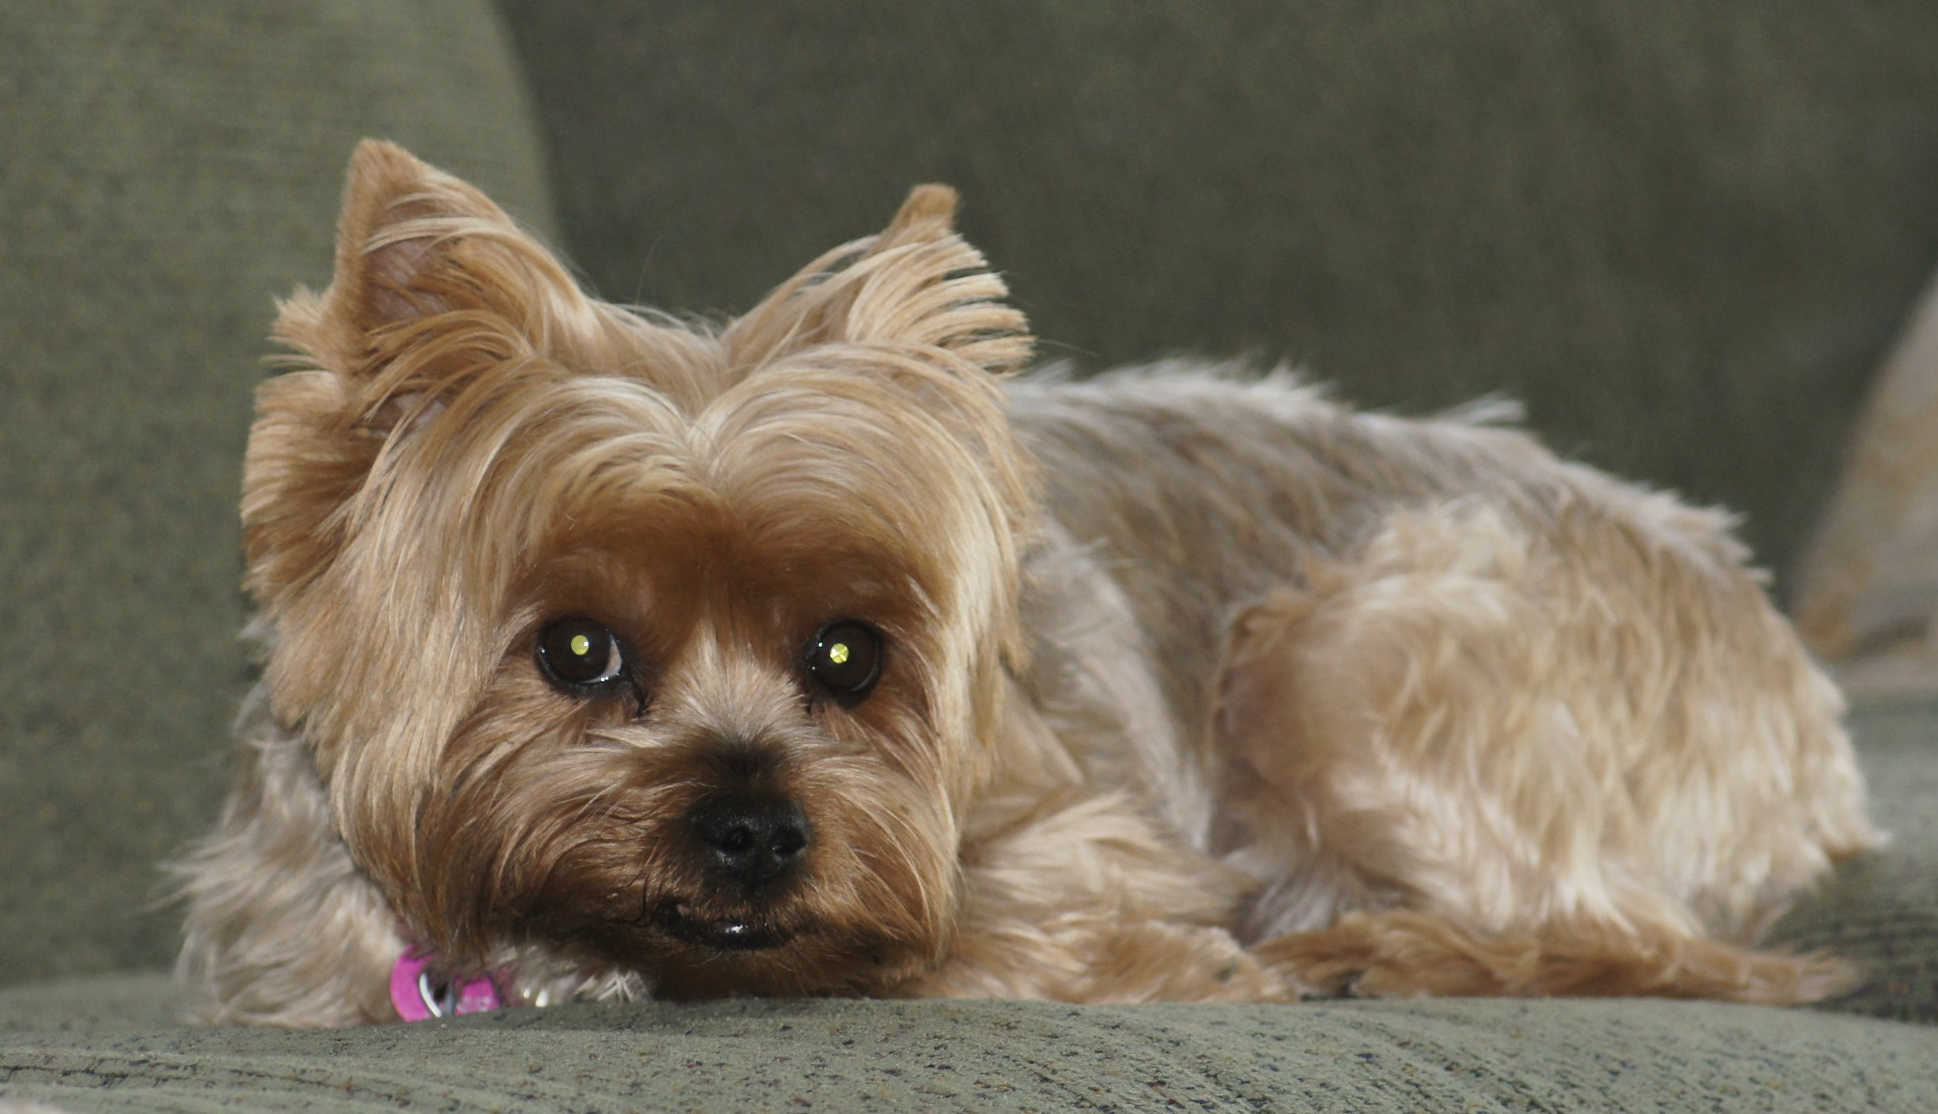 Yorkie laying down on couch.